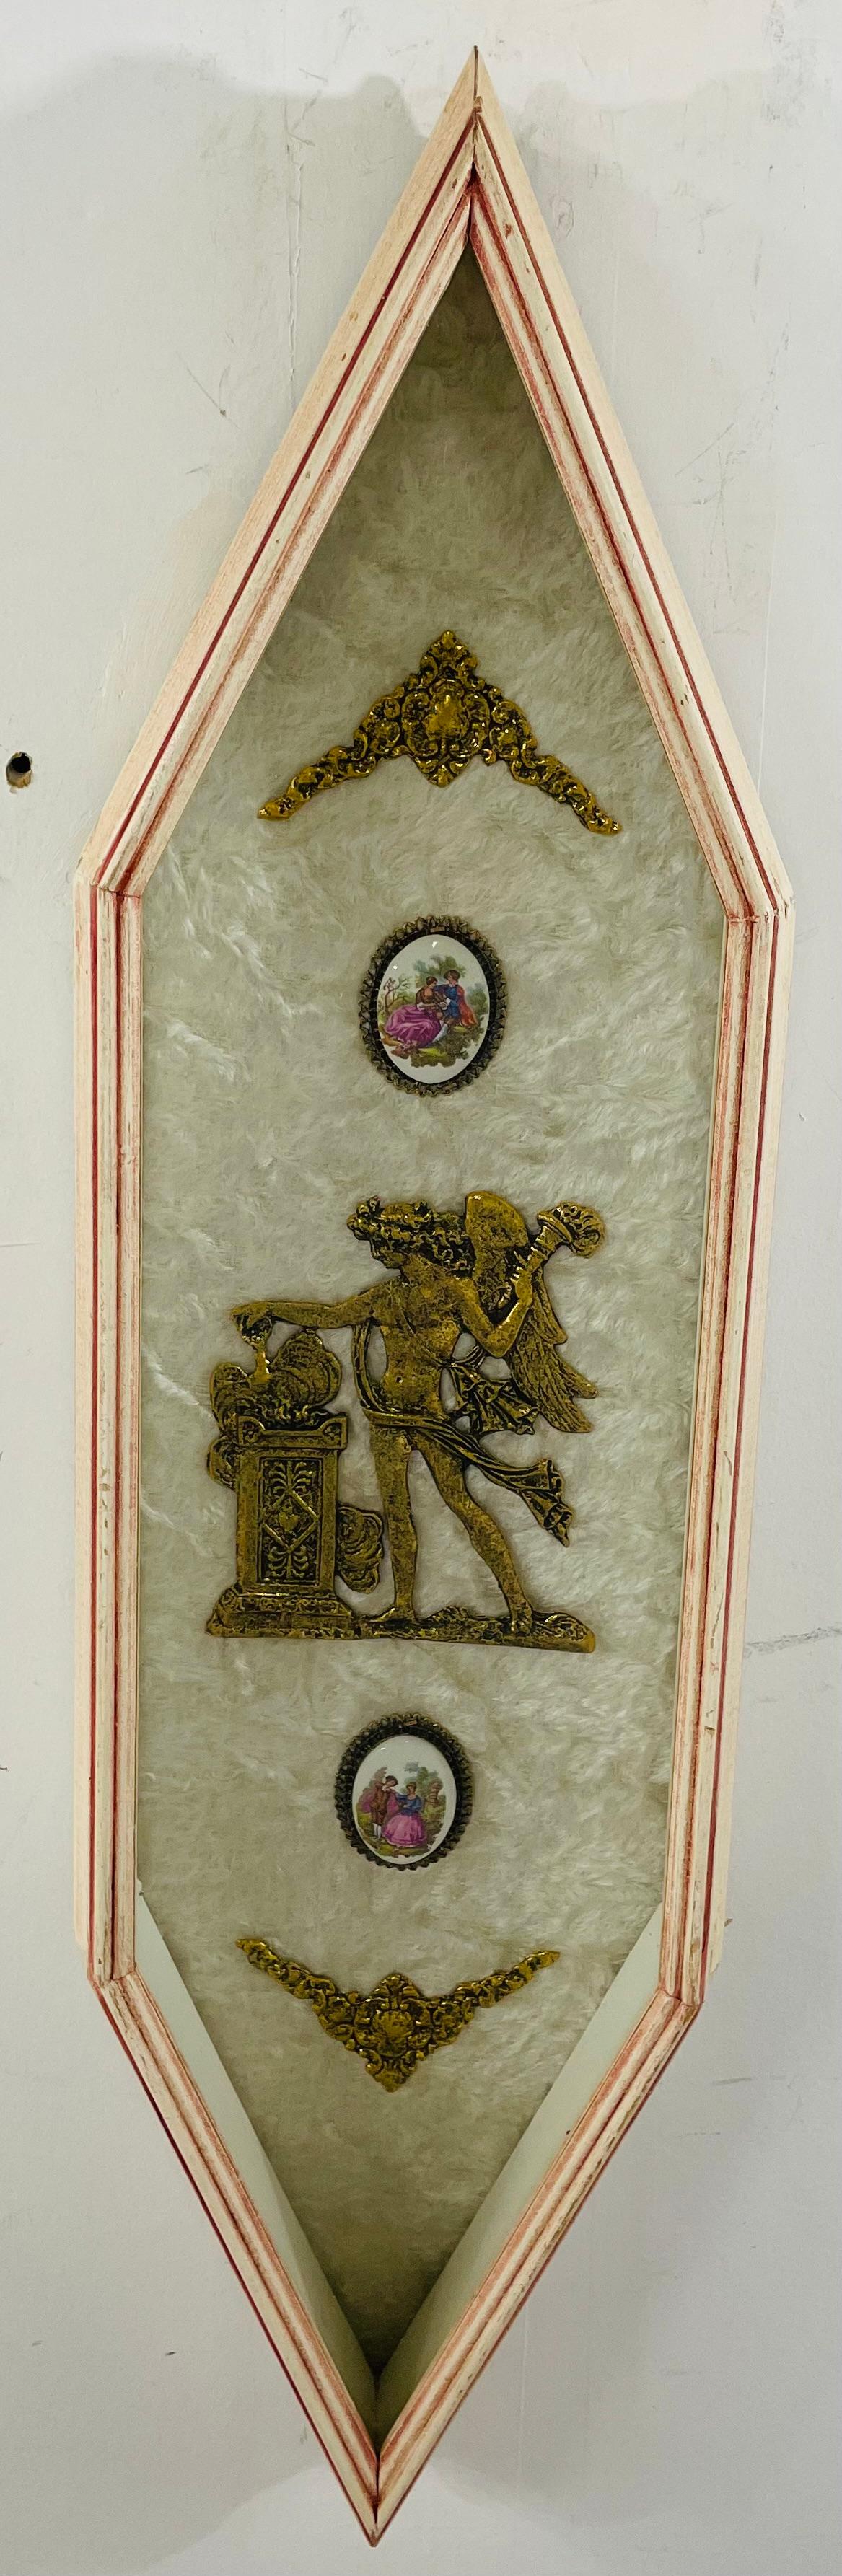 A pair of Italian Renaissance style wall decorative plaques. the hexagonal shaped plaques has each a fine brass floral design on top and bottom, two oval hand painted porcelain of a man courting a lady and in the middle one has a brass design of a